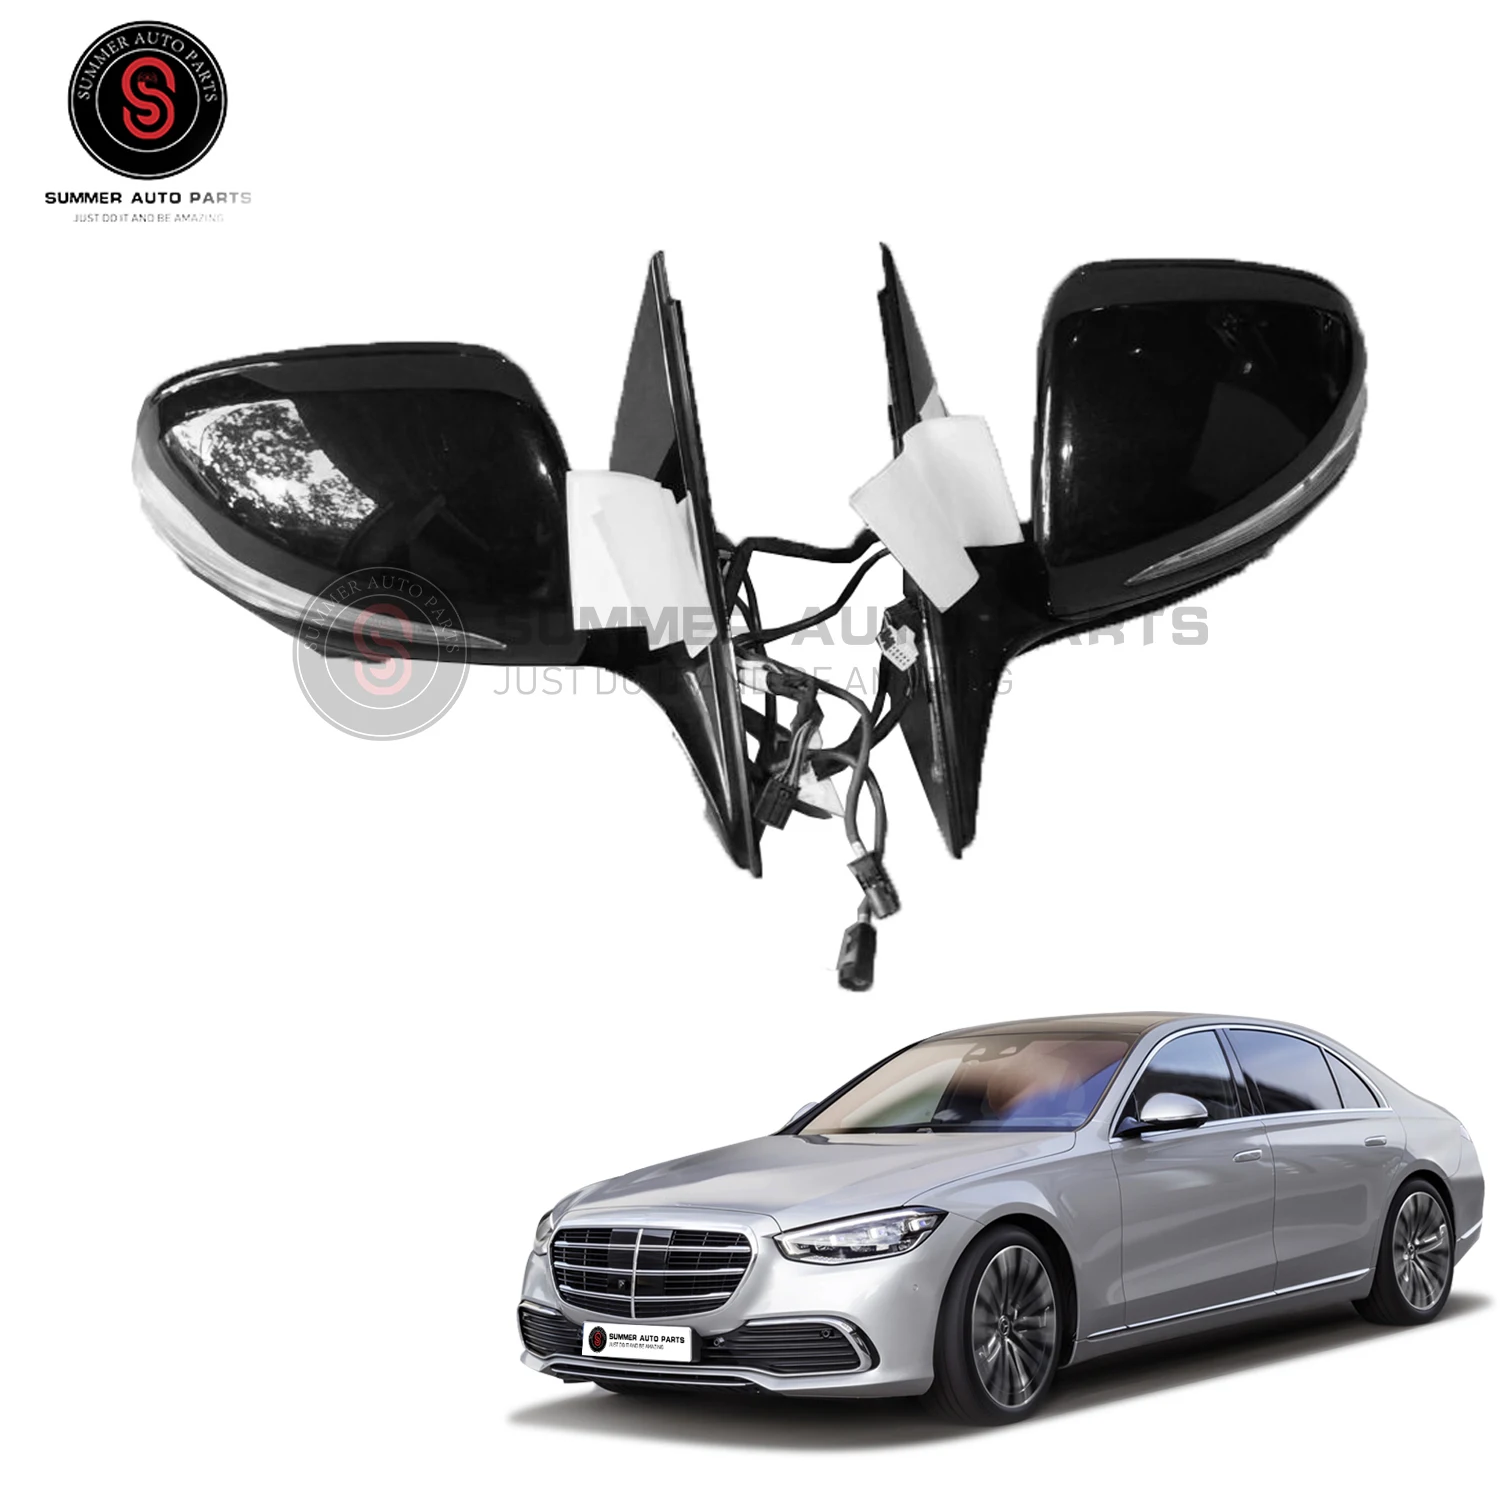 

WITH WIRE ELECTRIC LENS PROTECTOR ACCESSORIES WIDE ANGLE PRODUCT Nemo W222 SIDE MIRROR for S CLASS W222